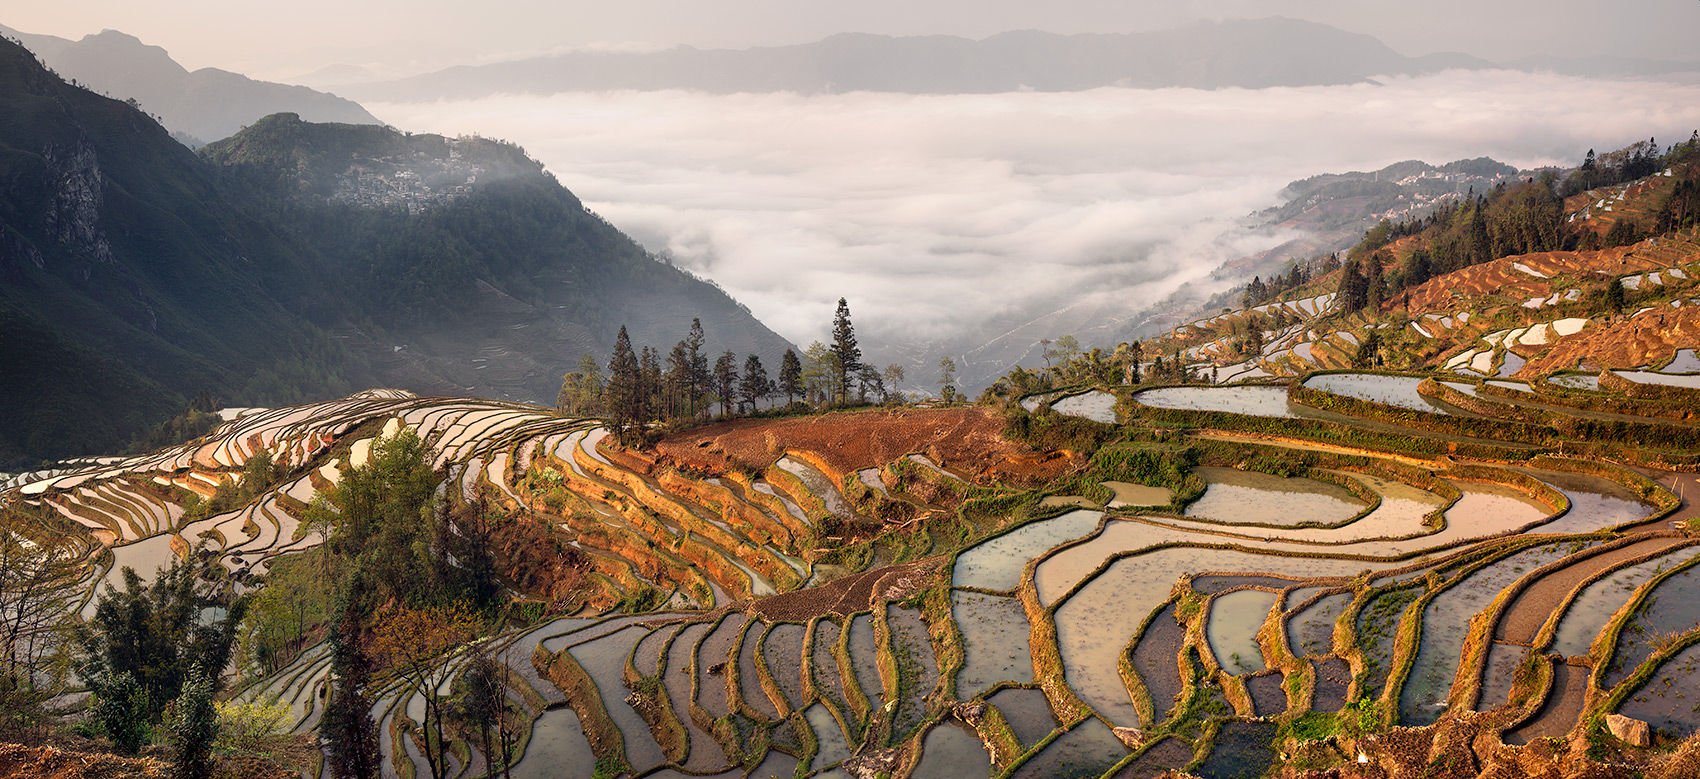 Landscapes by Yury Pustovoy - China, terraced rice fields by Yury Pustovoy